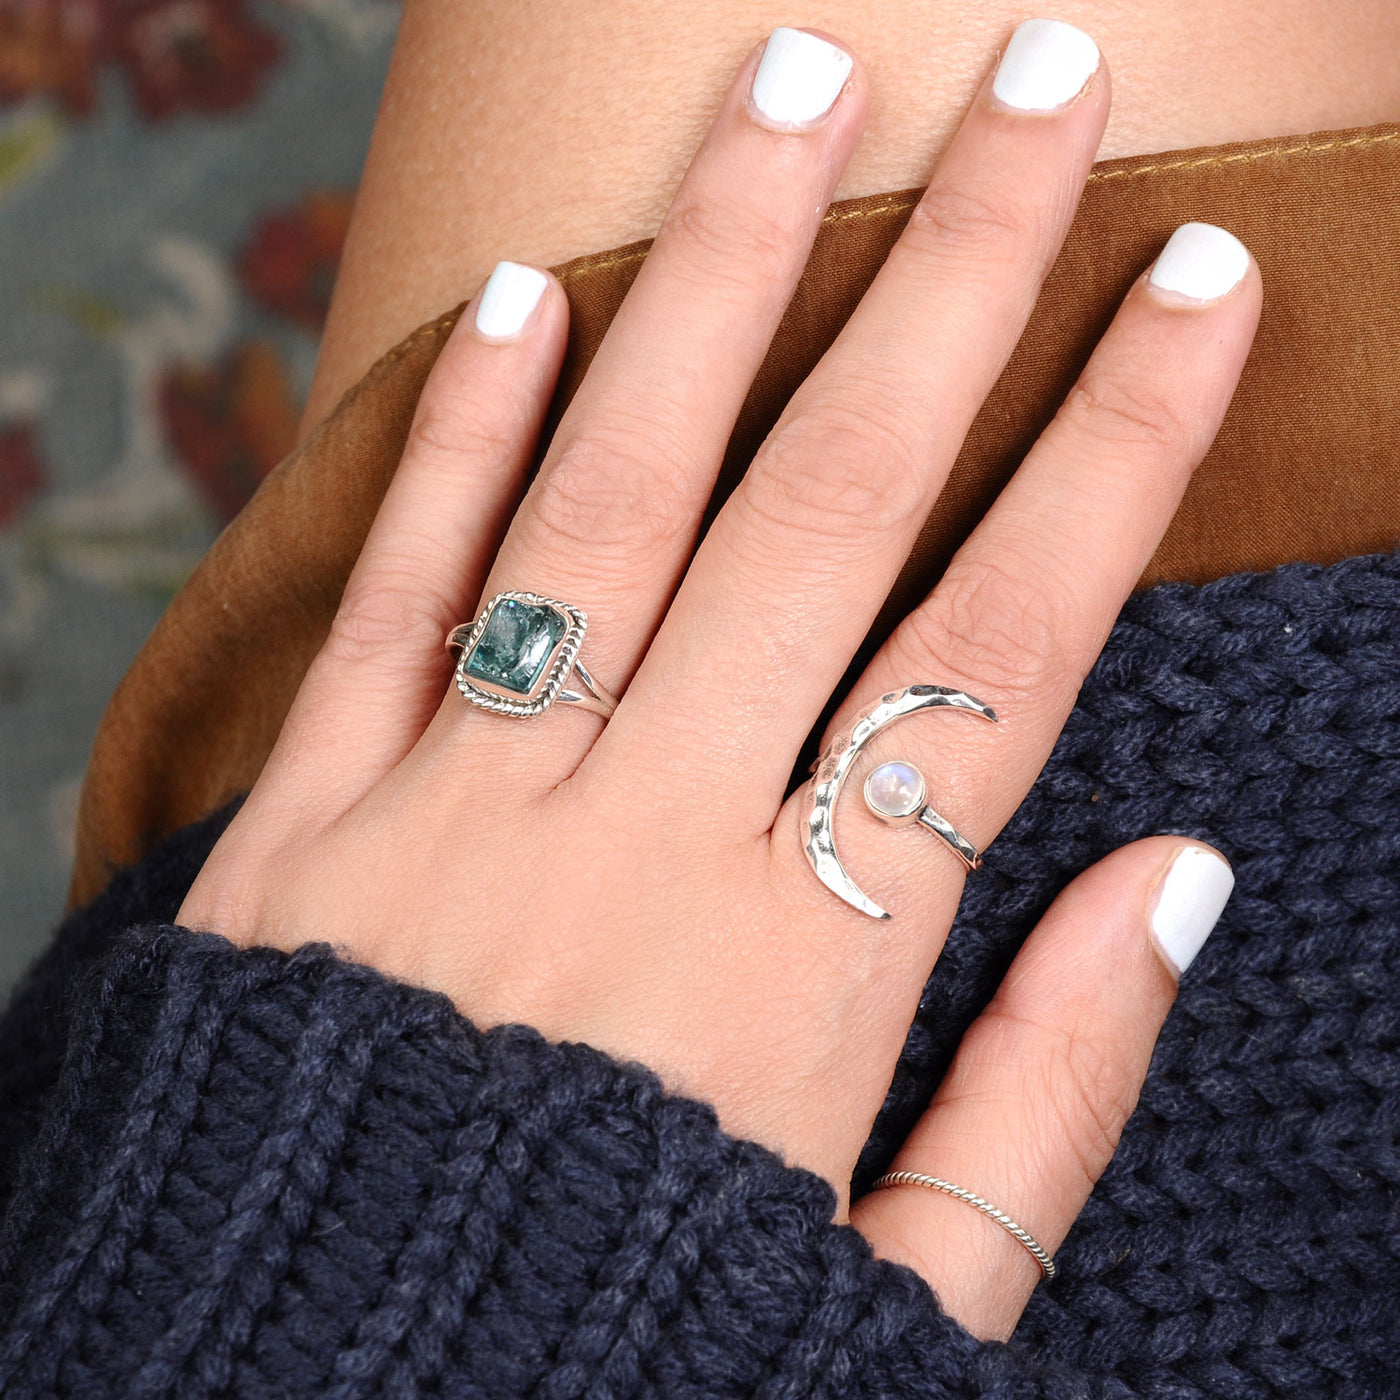 Sterling Silver Crescent Moon Ring with Moonstone